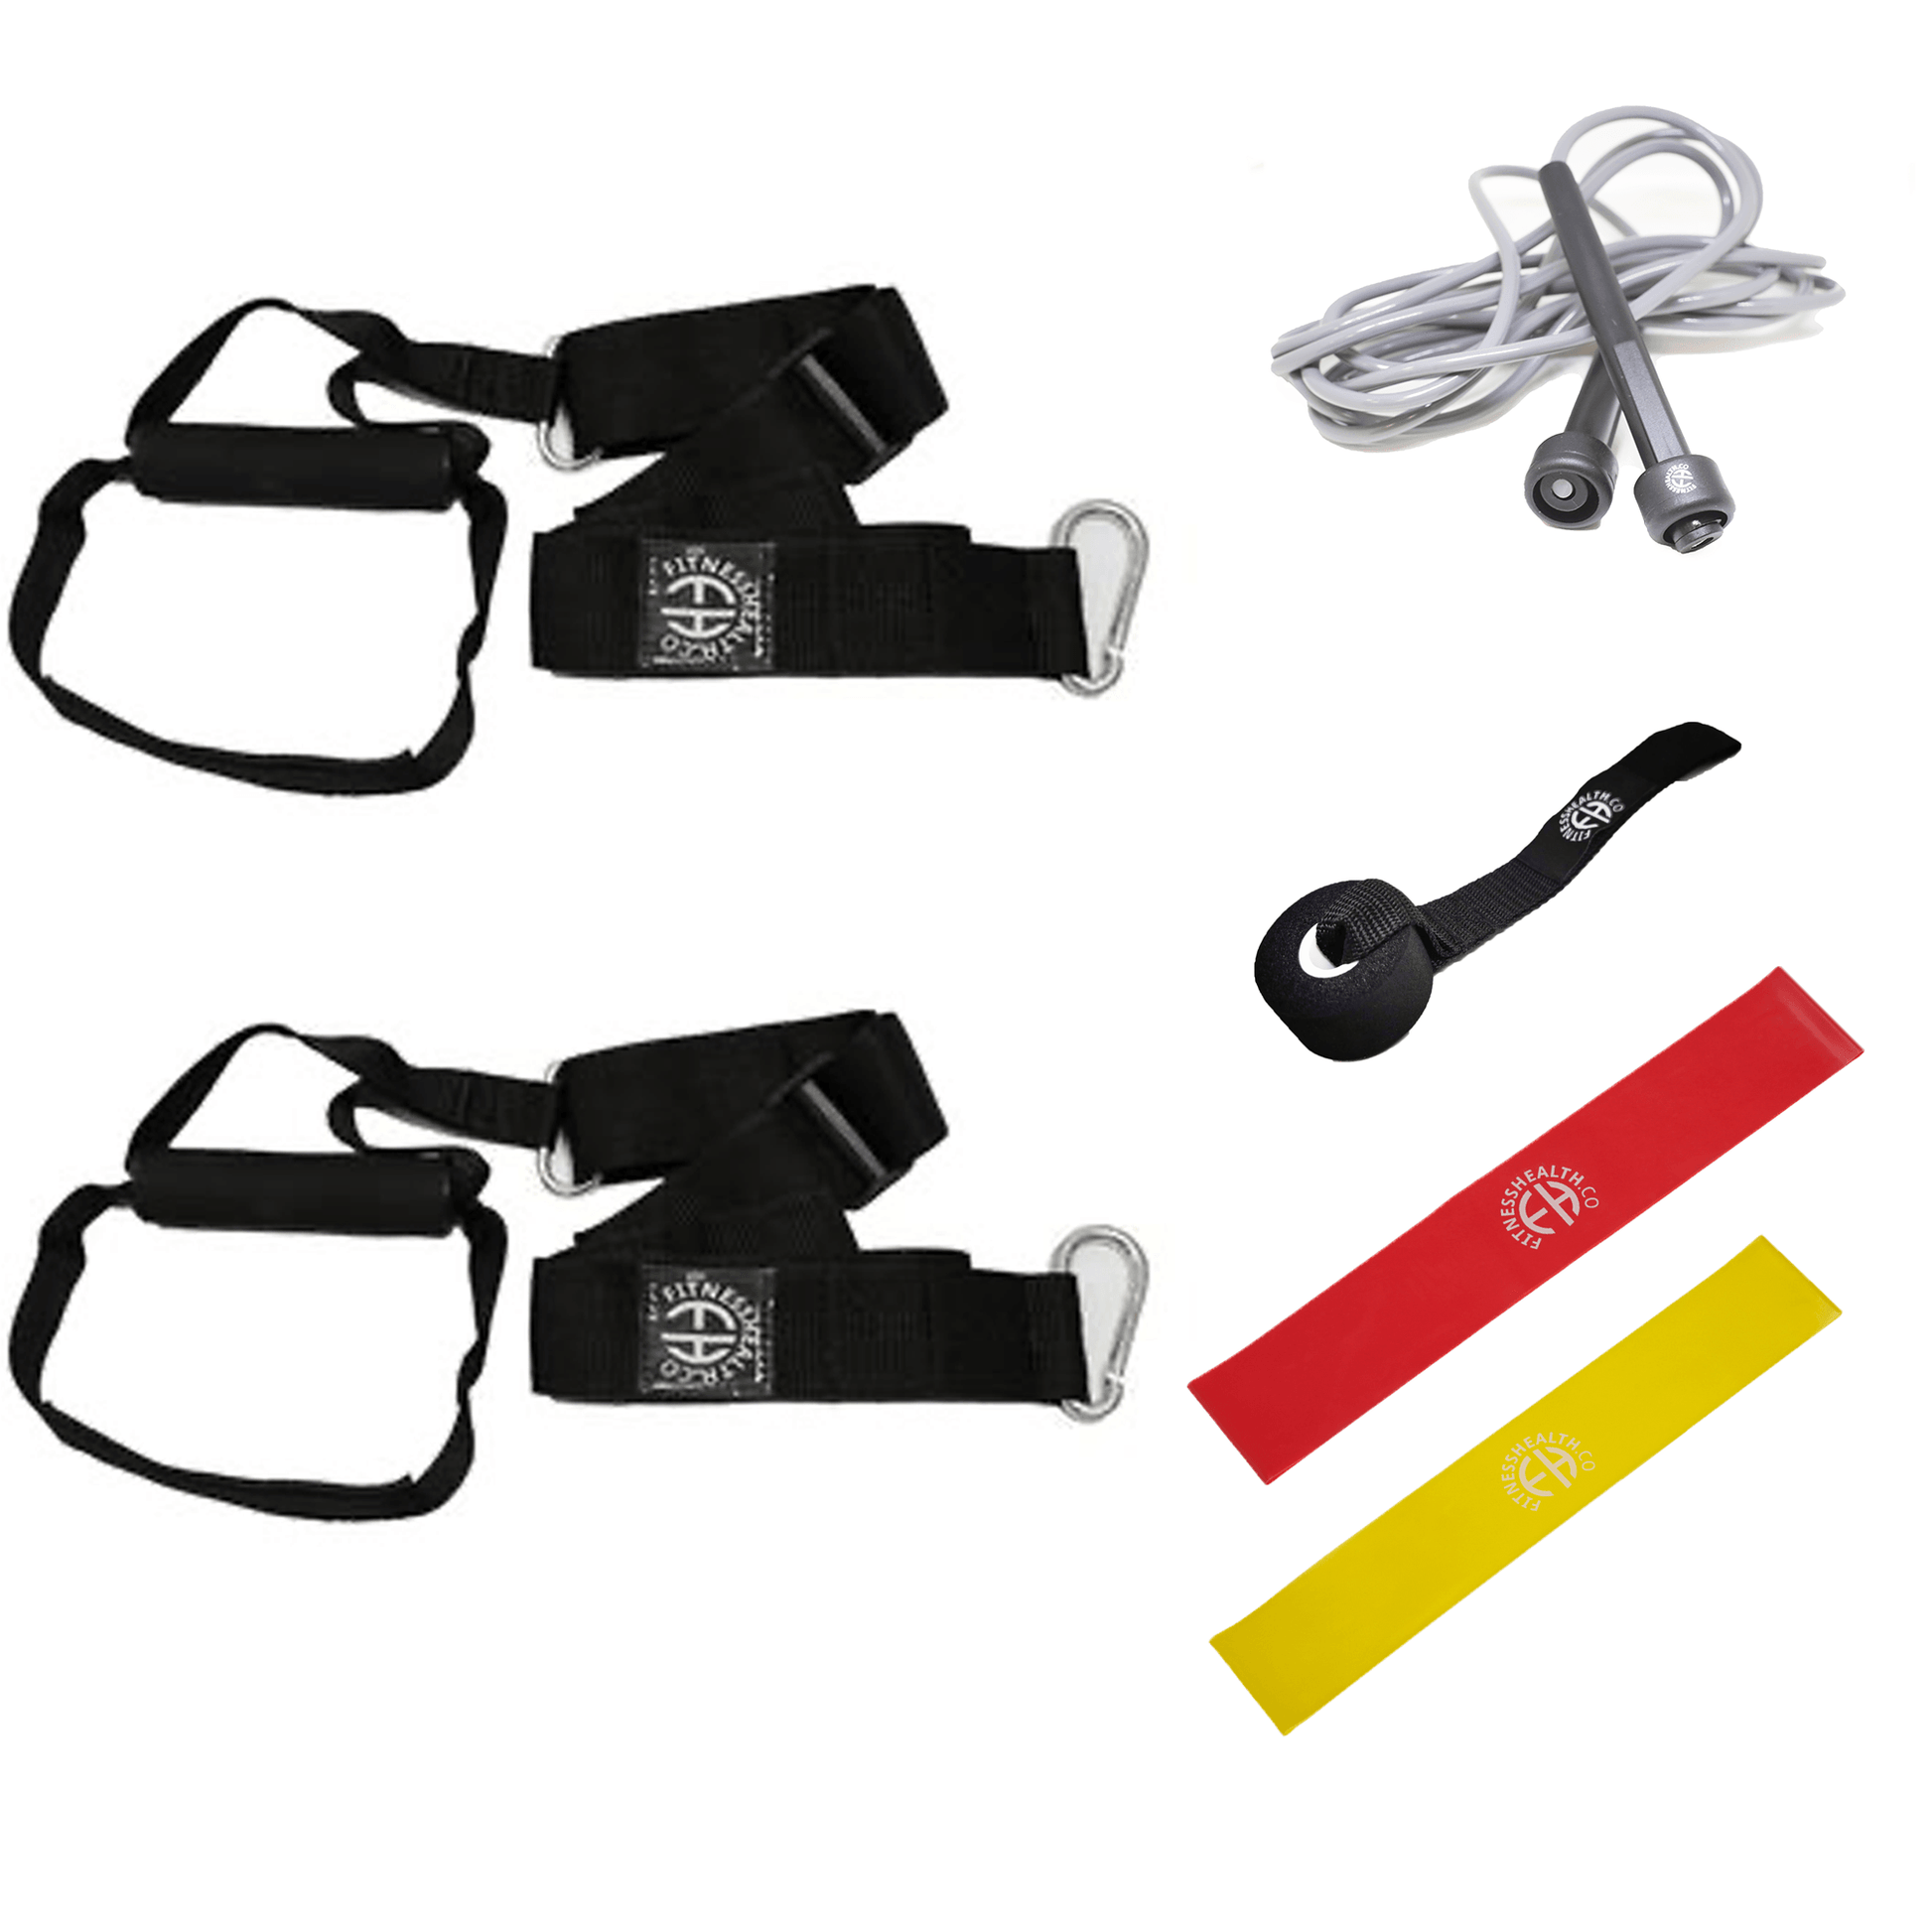 Complete Home Fitness Suspension Training Set - Fitness Health 